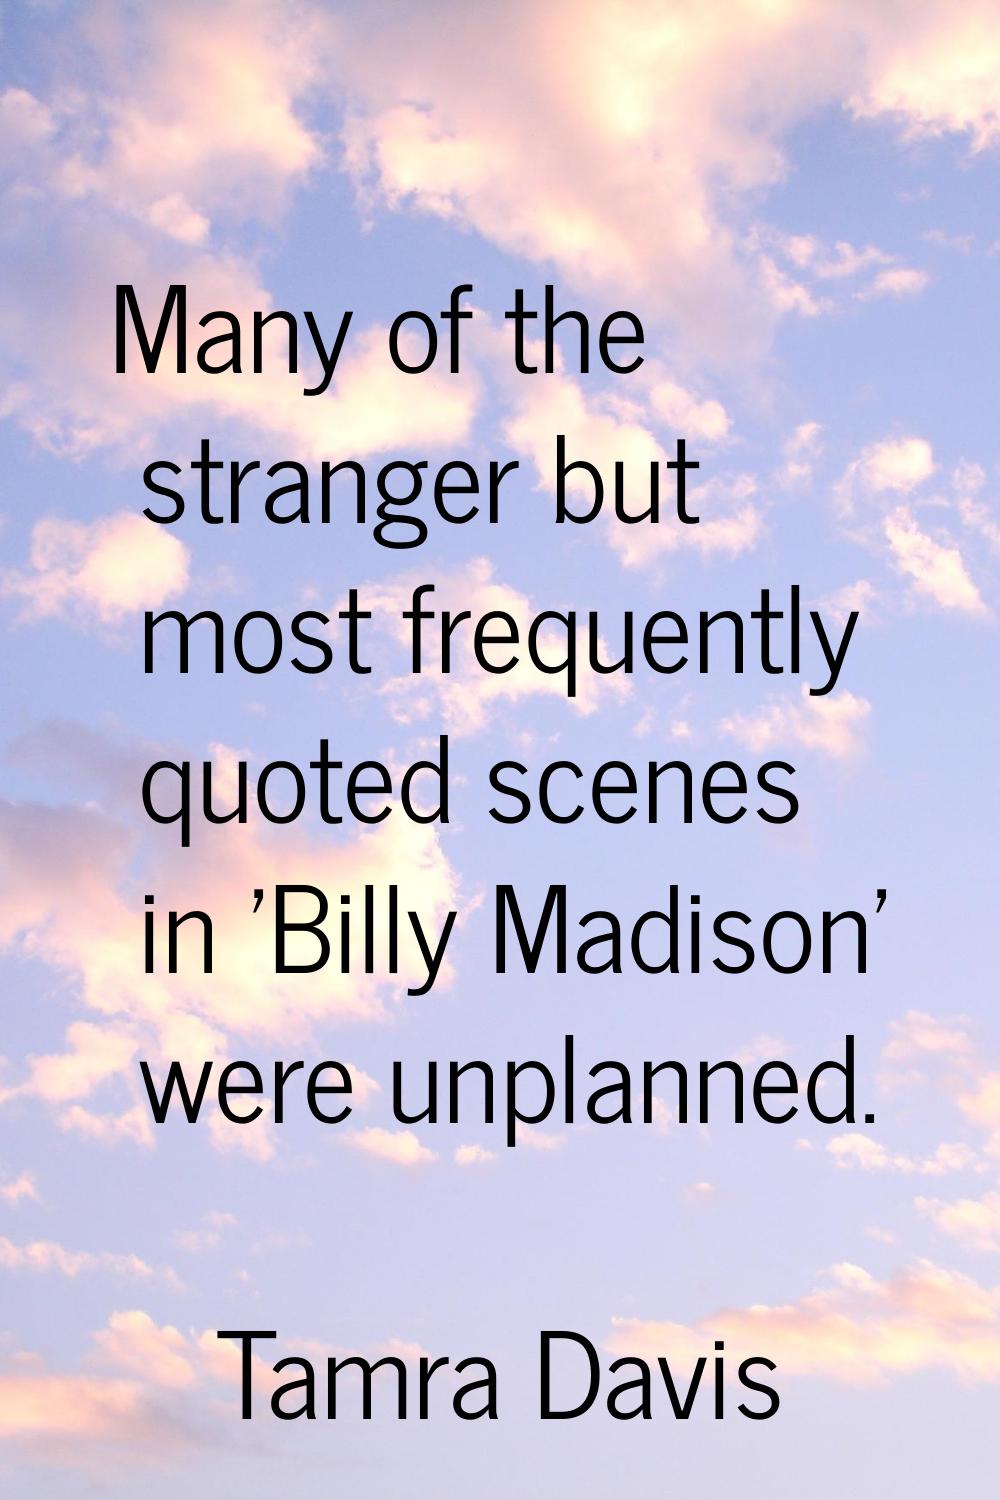 Many of the stranger but most frequently quoted scenes in 'Billy Madison' were unplanned.